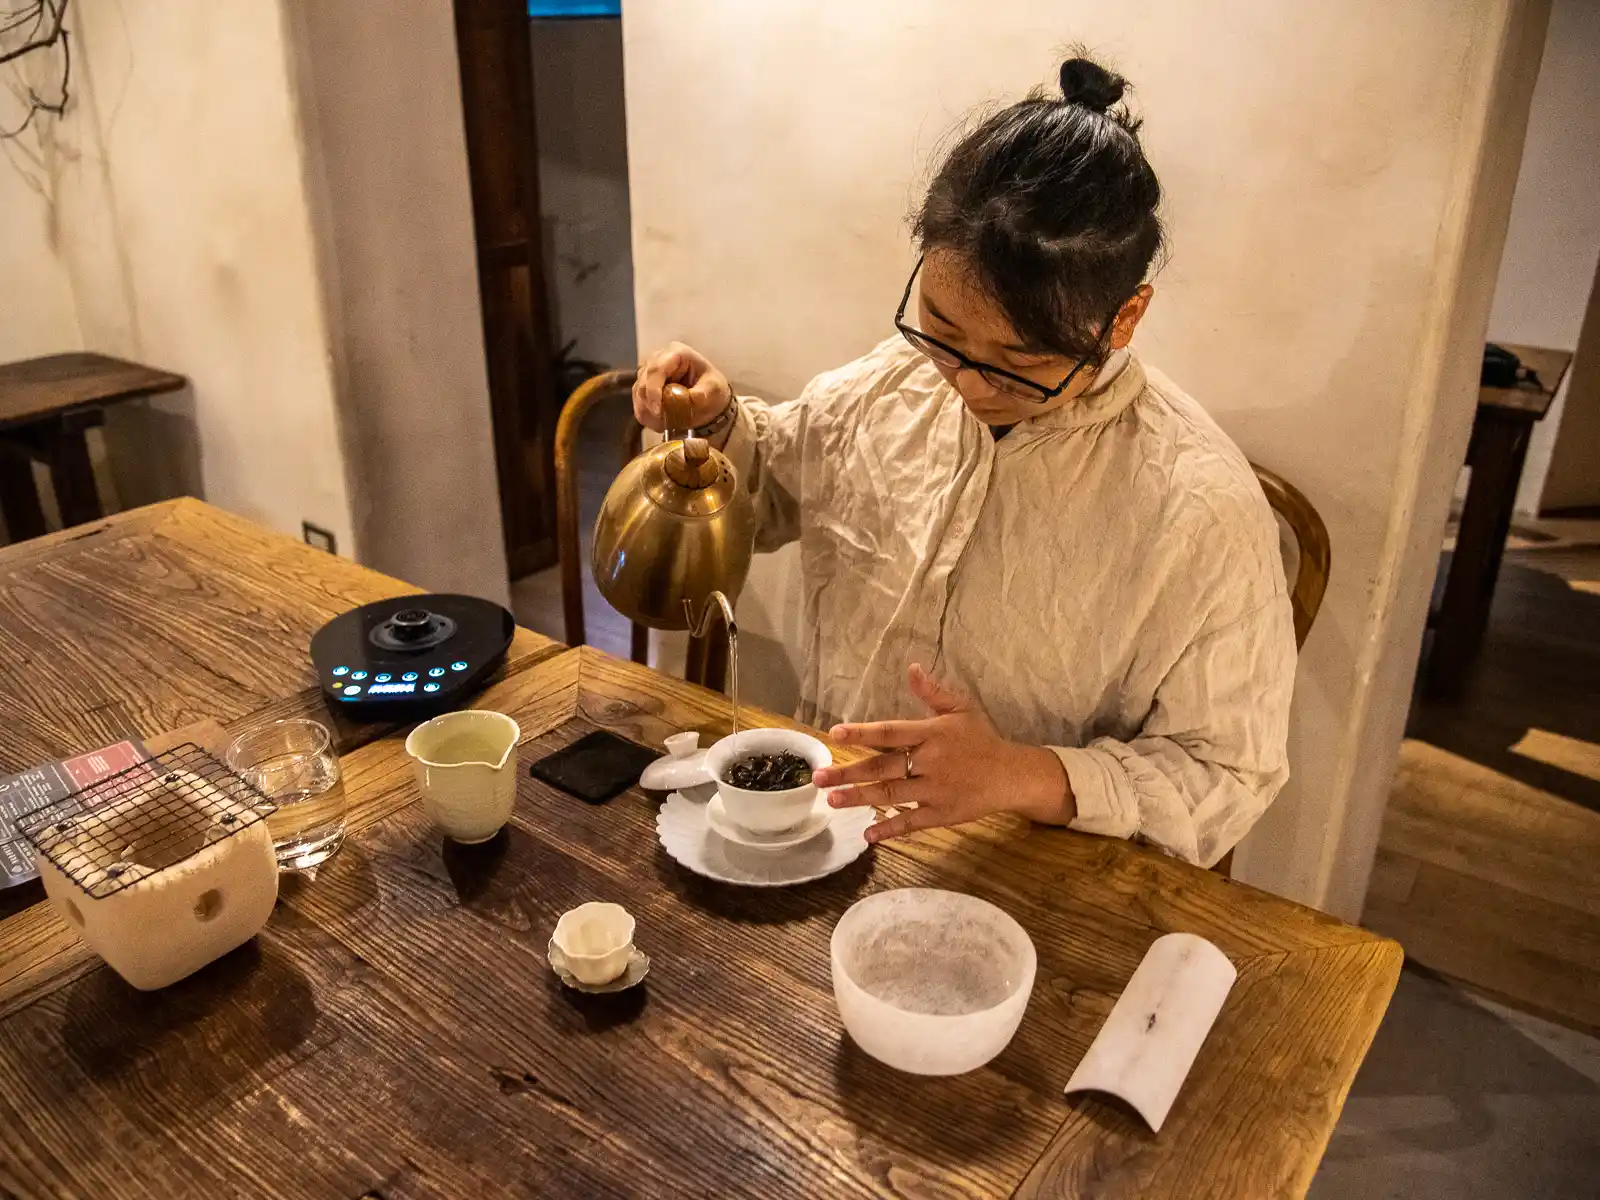 An employee demonstrating how to properly brew tea leaves.